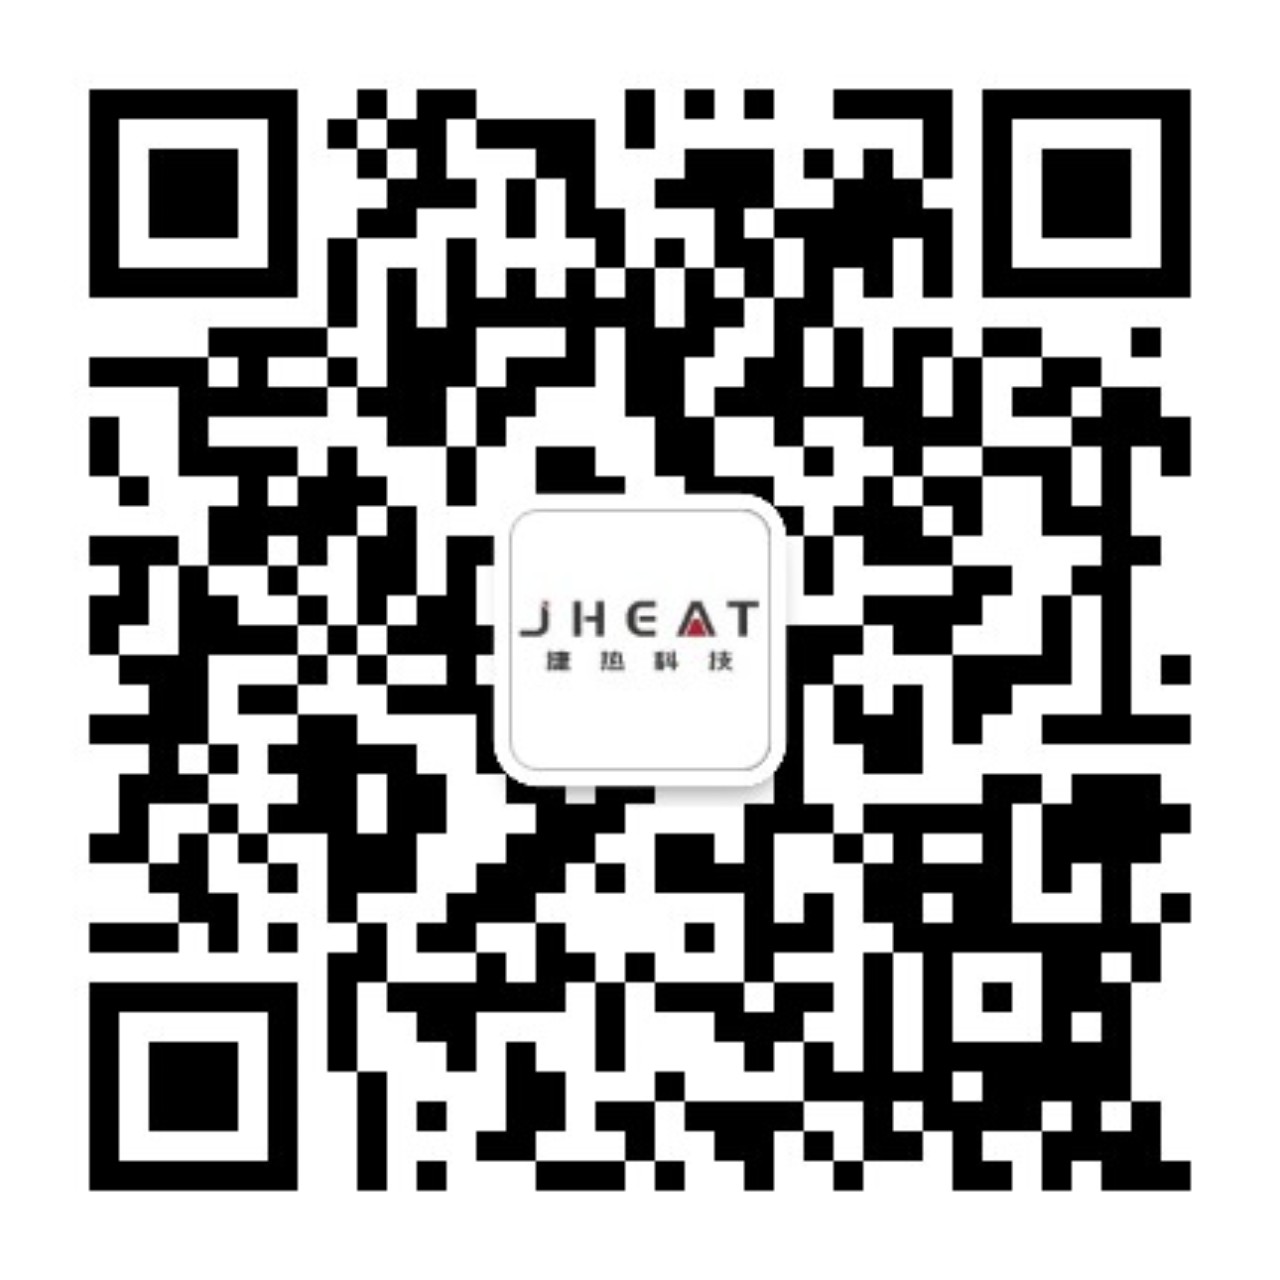 WeChat official account